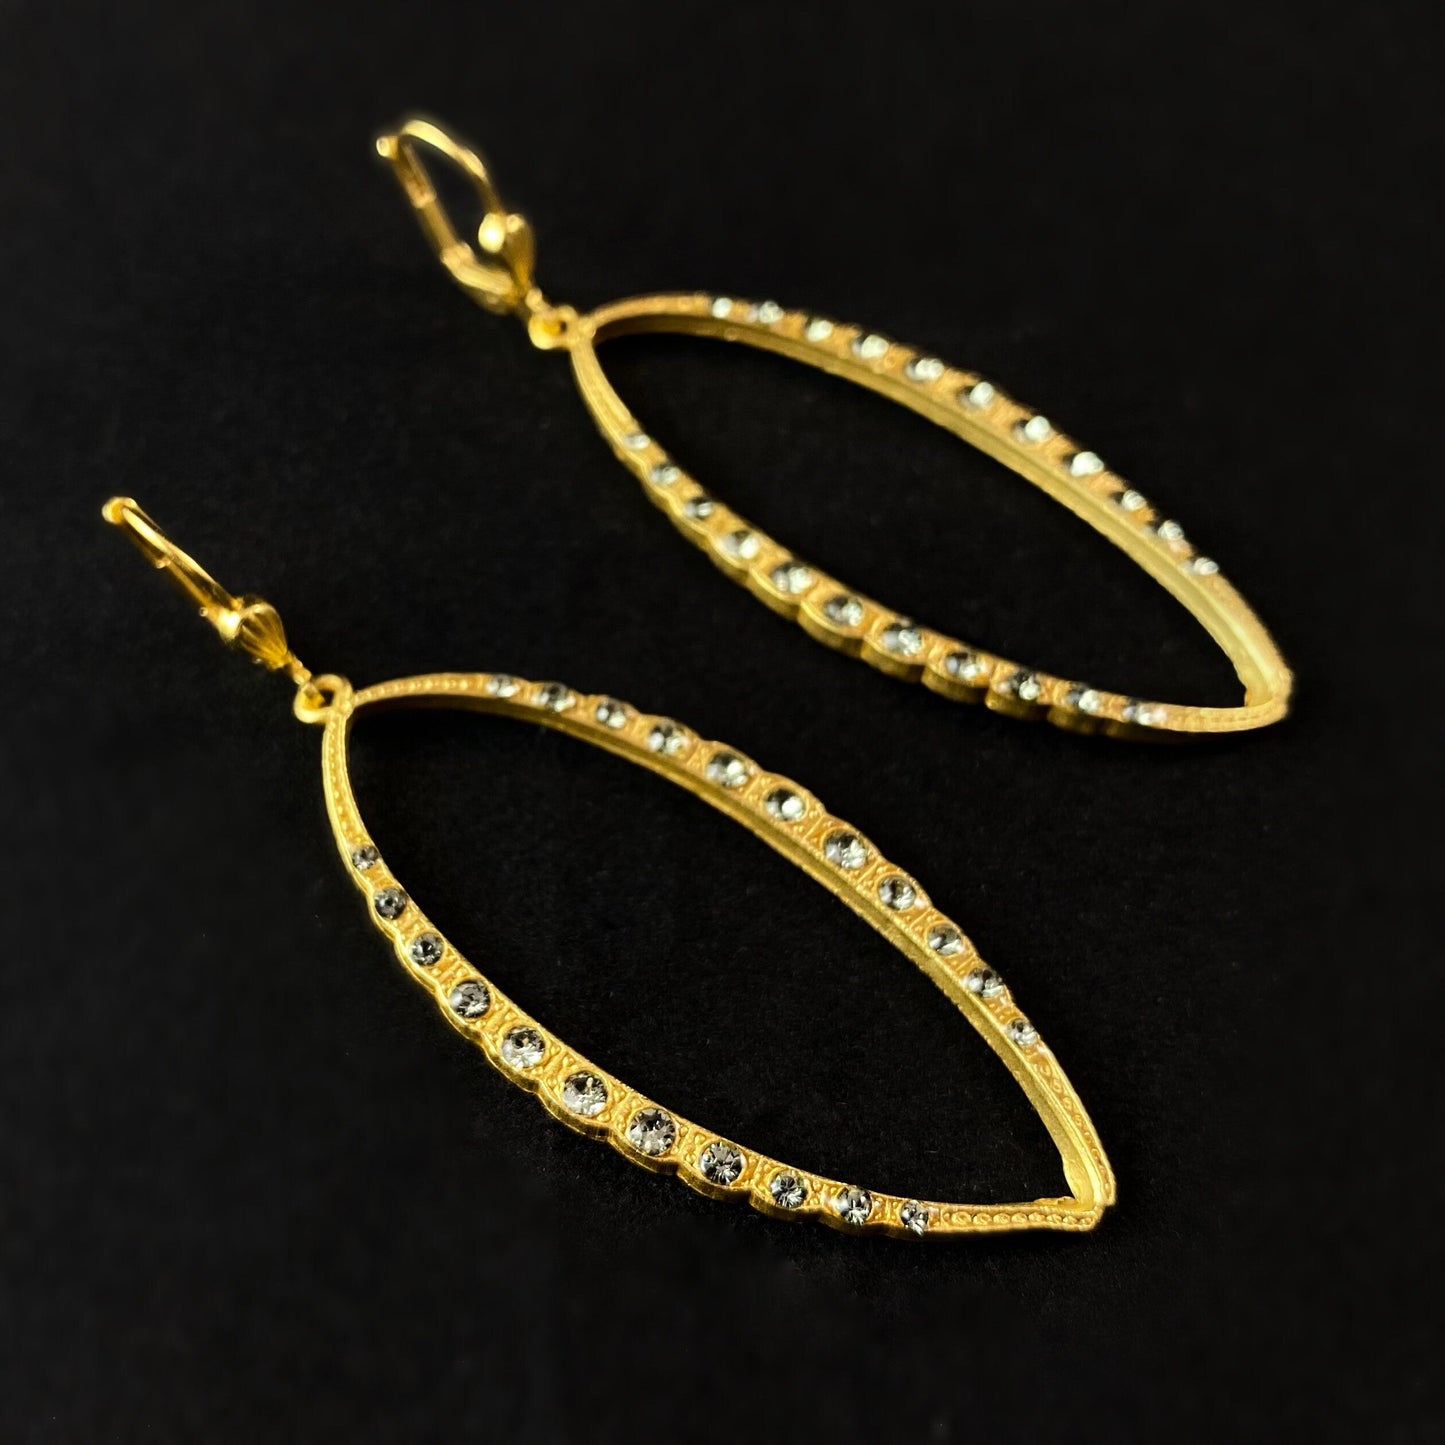 Oval Gold Drop Earrings with Clear Swarovski Crystals - La Vie Parisienne by Catherine Popesco